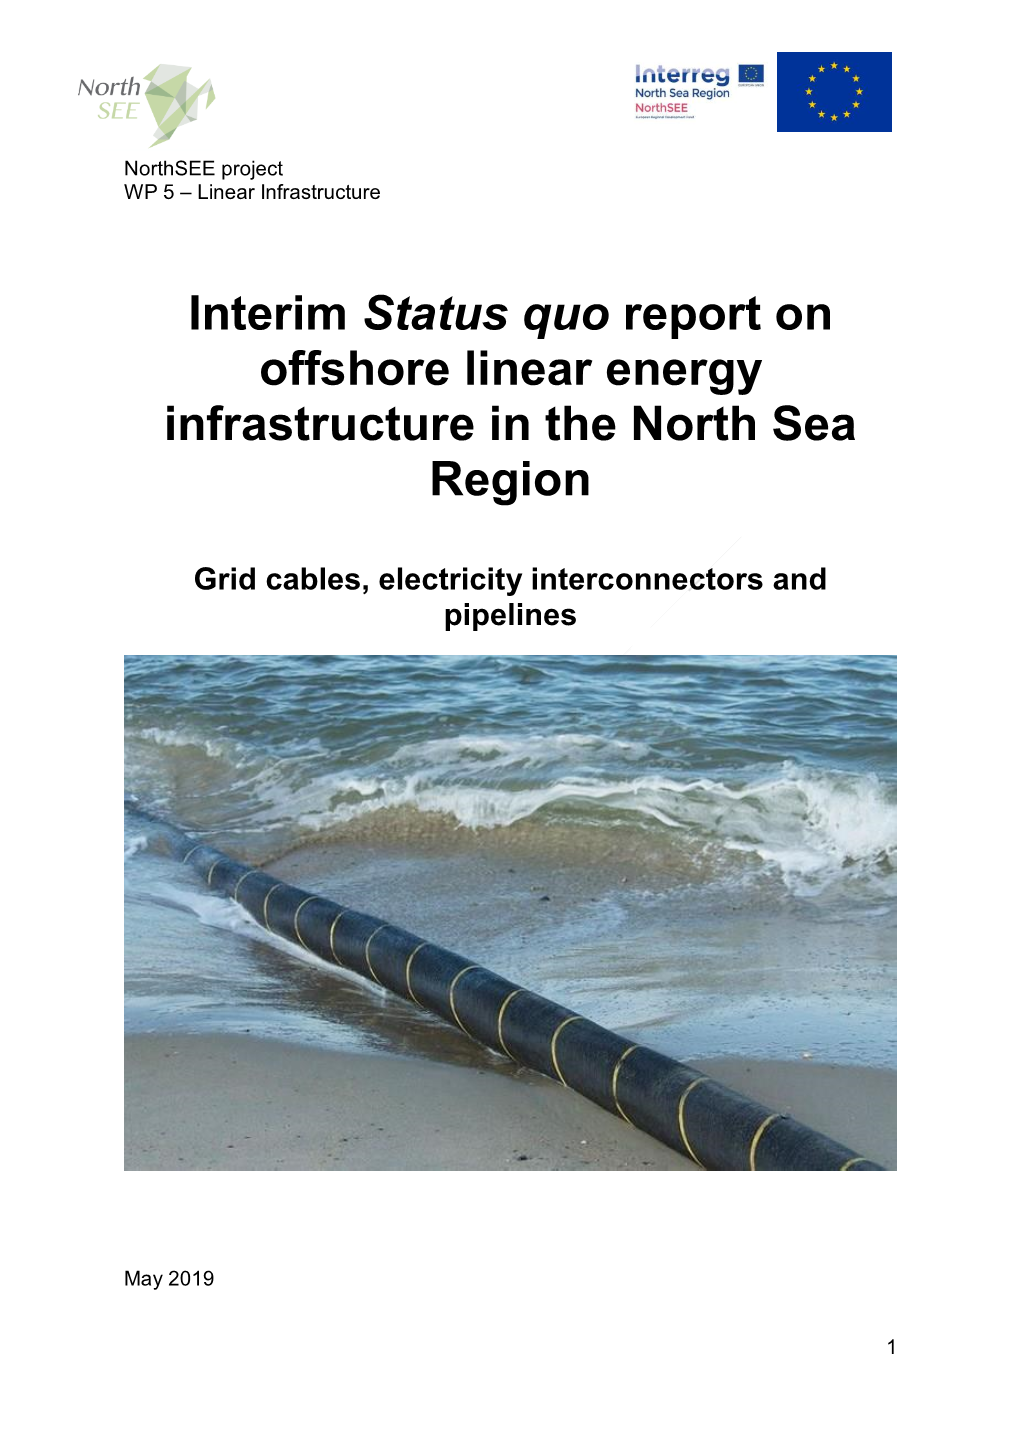 Interim Status Quo Report on Offshore Linear Energy Infrastructure in the North Sea Region